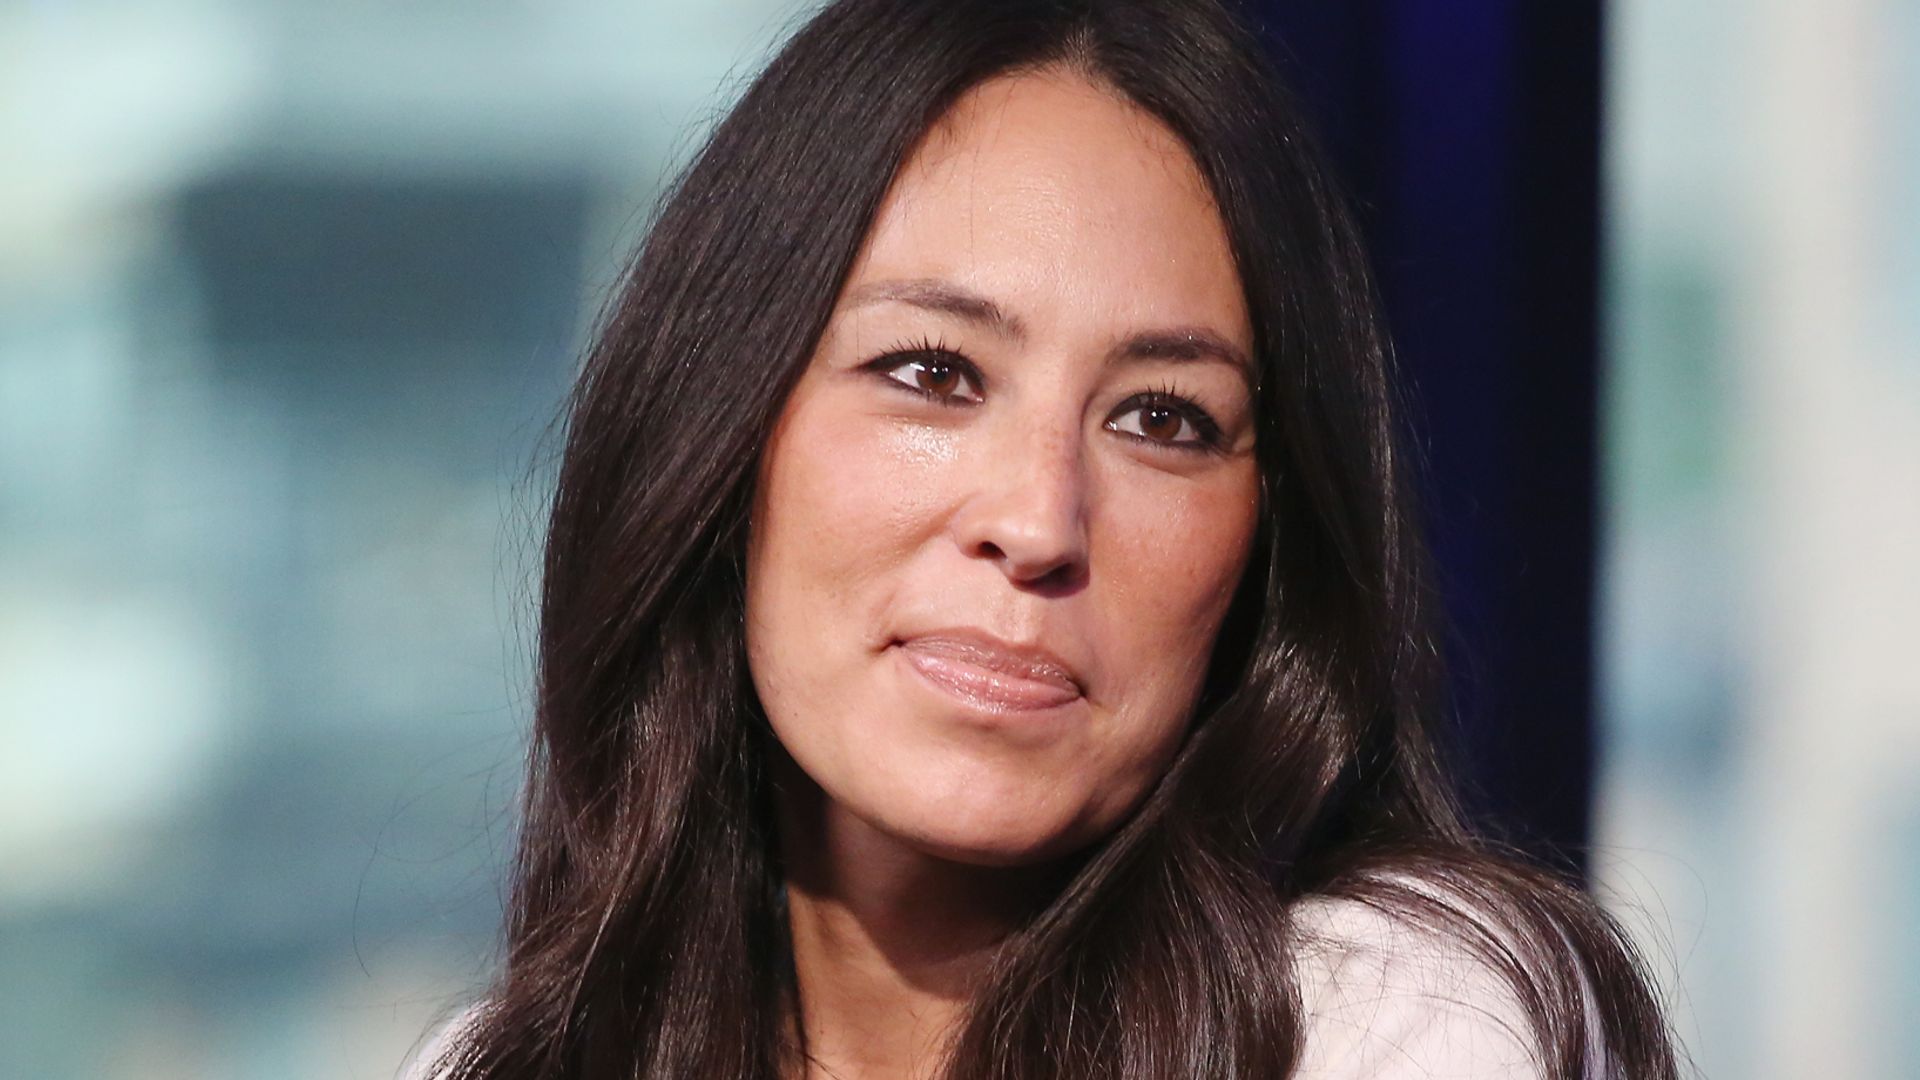 The Build Series presents Joanna Gaines to discuss the new book "The Magnolia Story" at AOL HQ on October 19, 2016 in New York City.  (Photo by Mireya Acierto/FilmMagic)